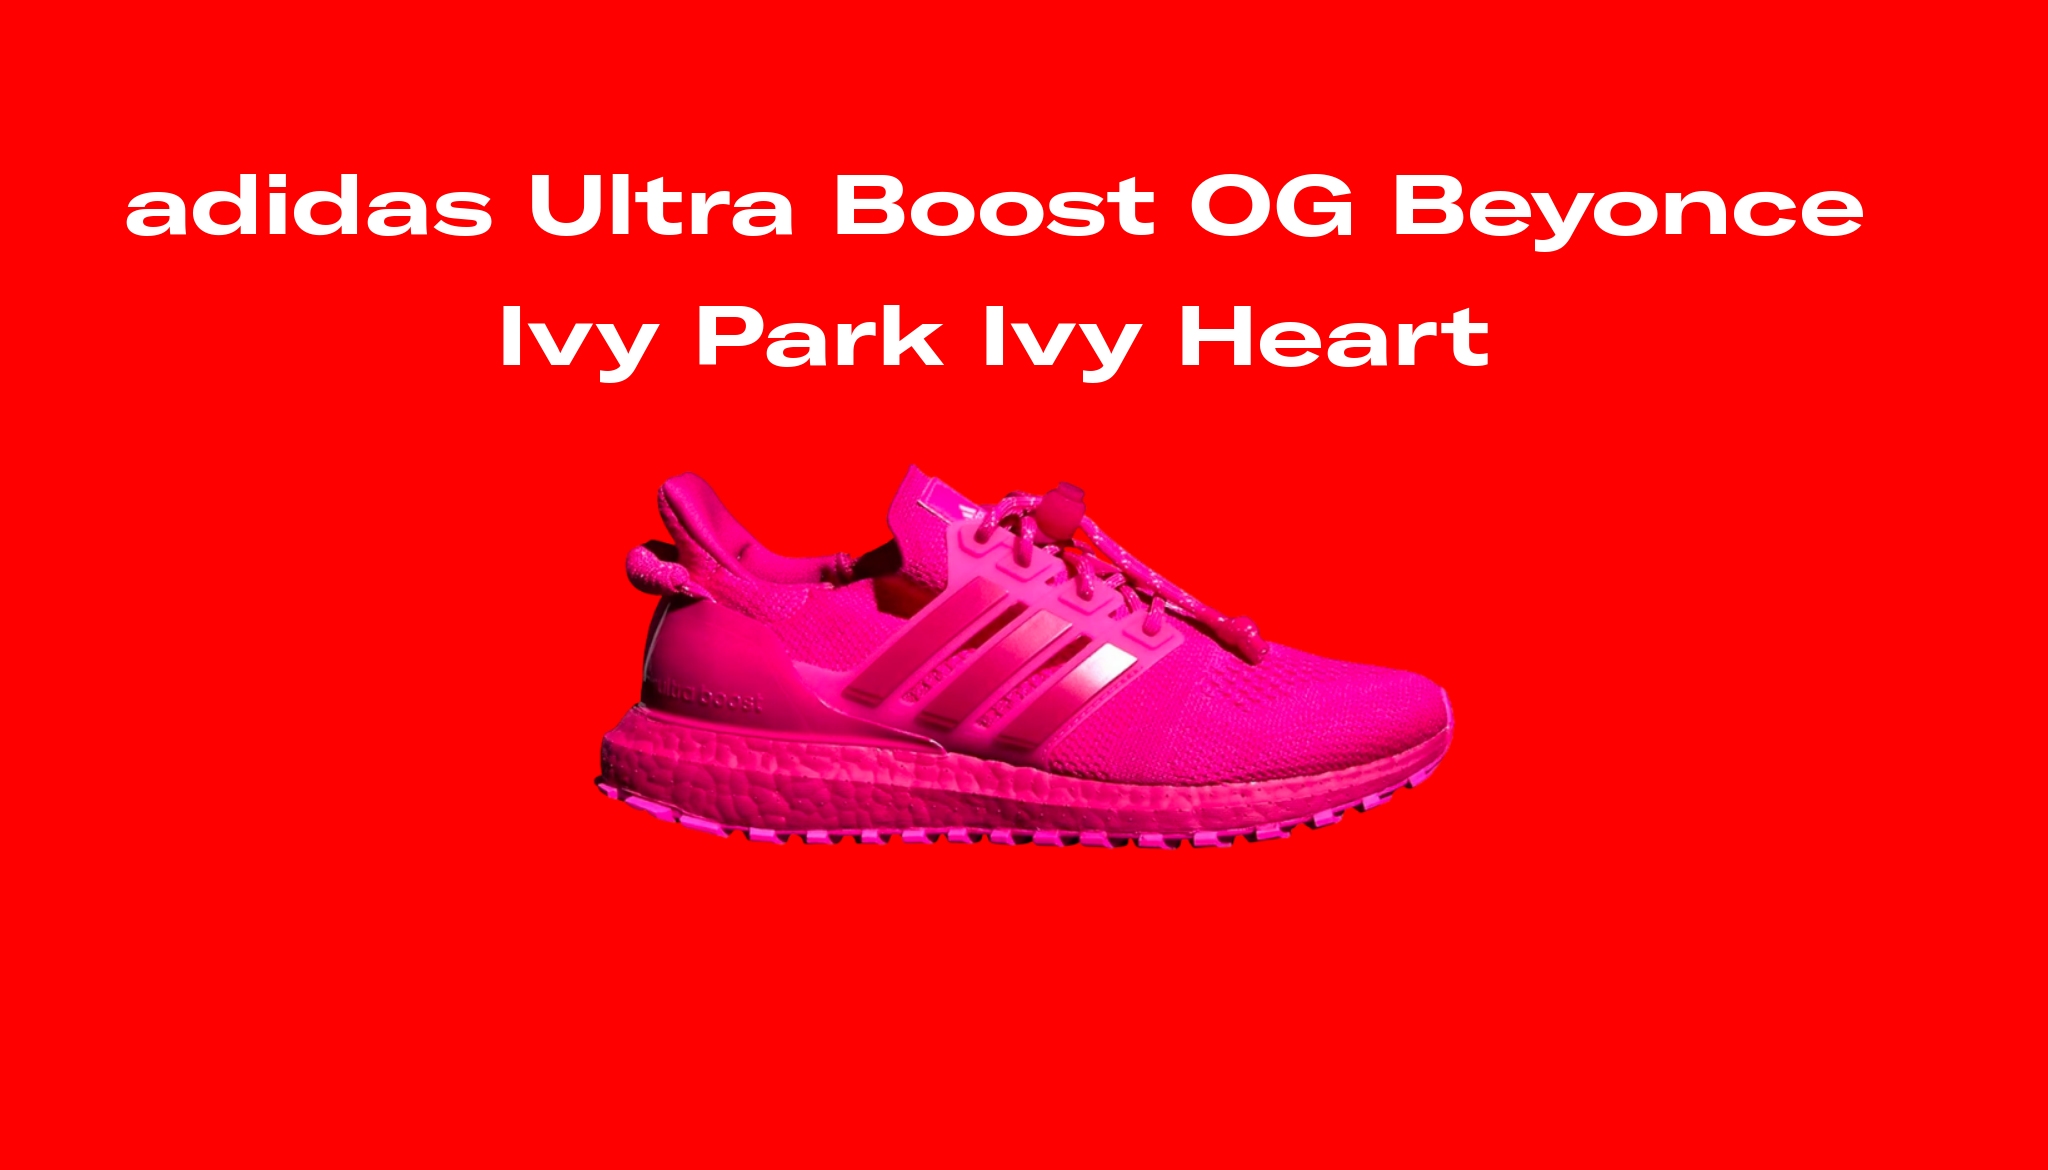 adidas Ultra Boost OG Beyonce Ivy Park Ivy Heart, Raffles and